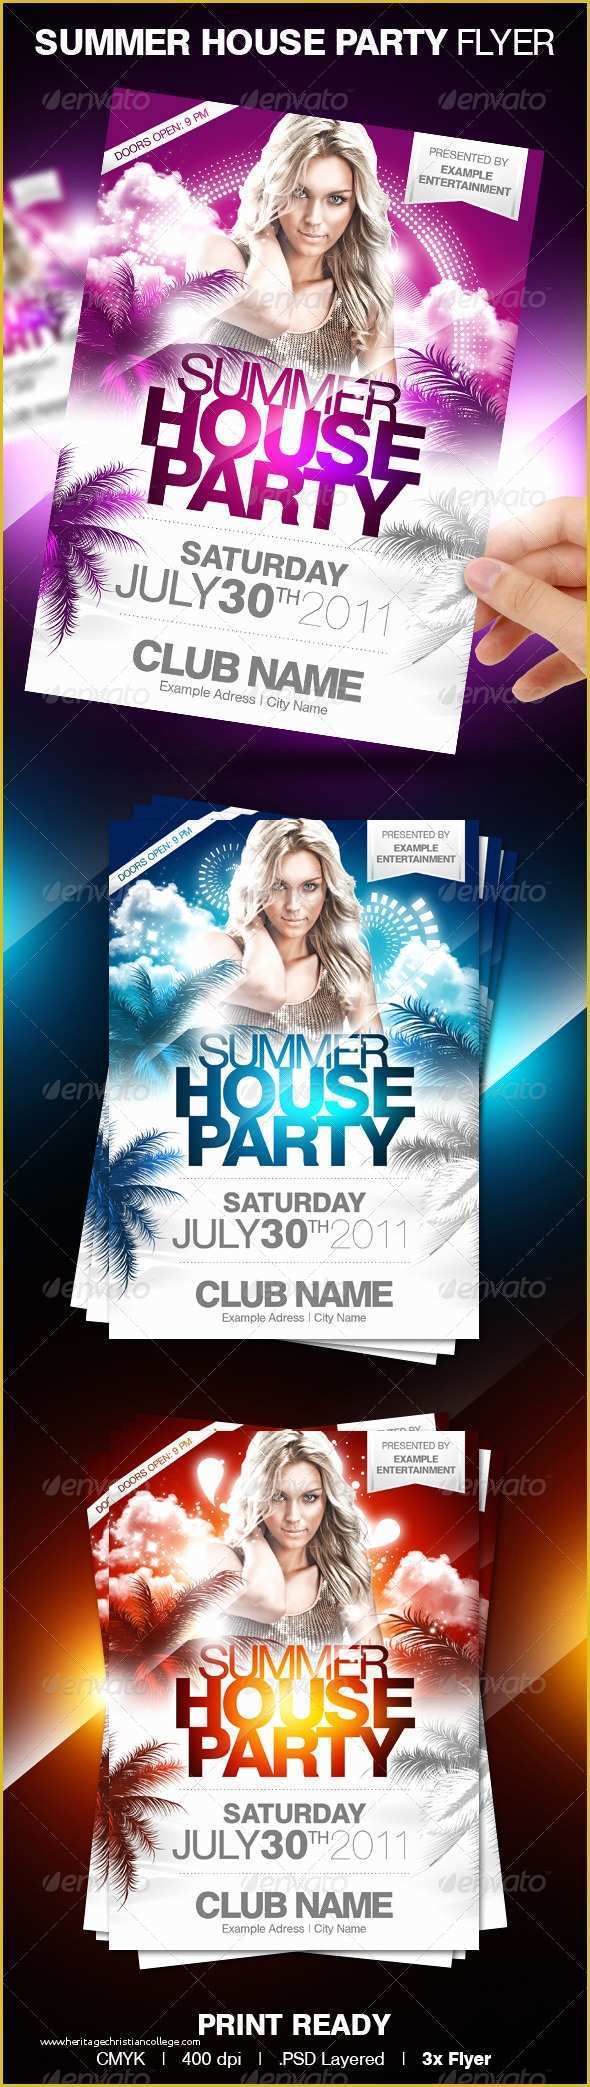 House Party Flyer Template Free Of Summer House Party Flyer